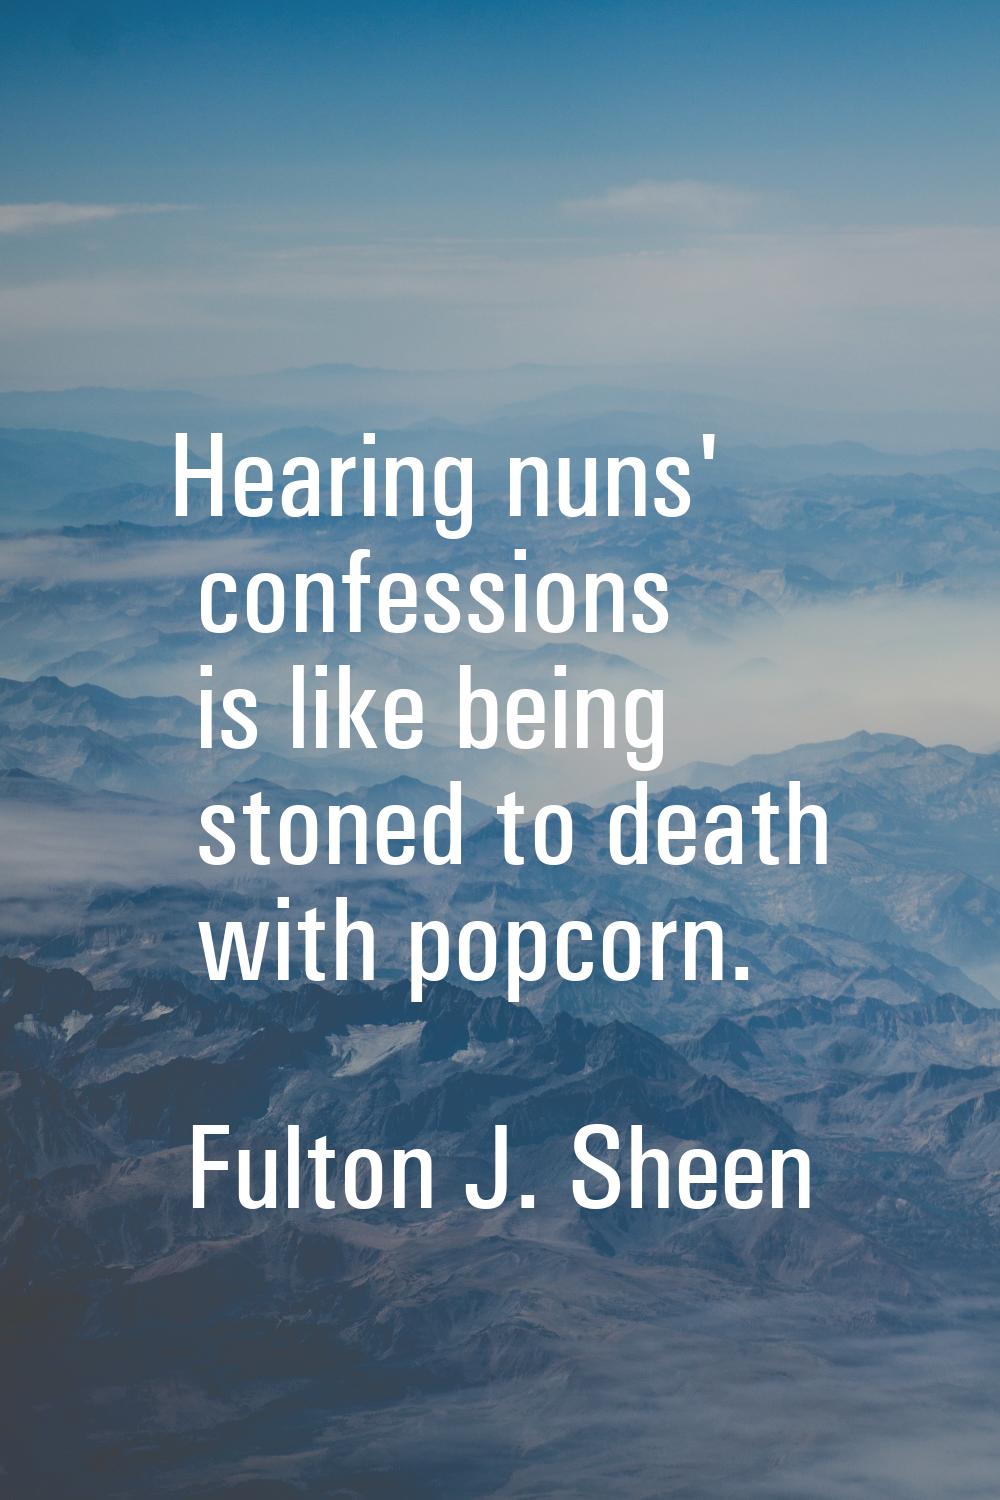 Hearing nuns' confessions is like being stoned to death with popcorn.